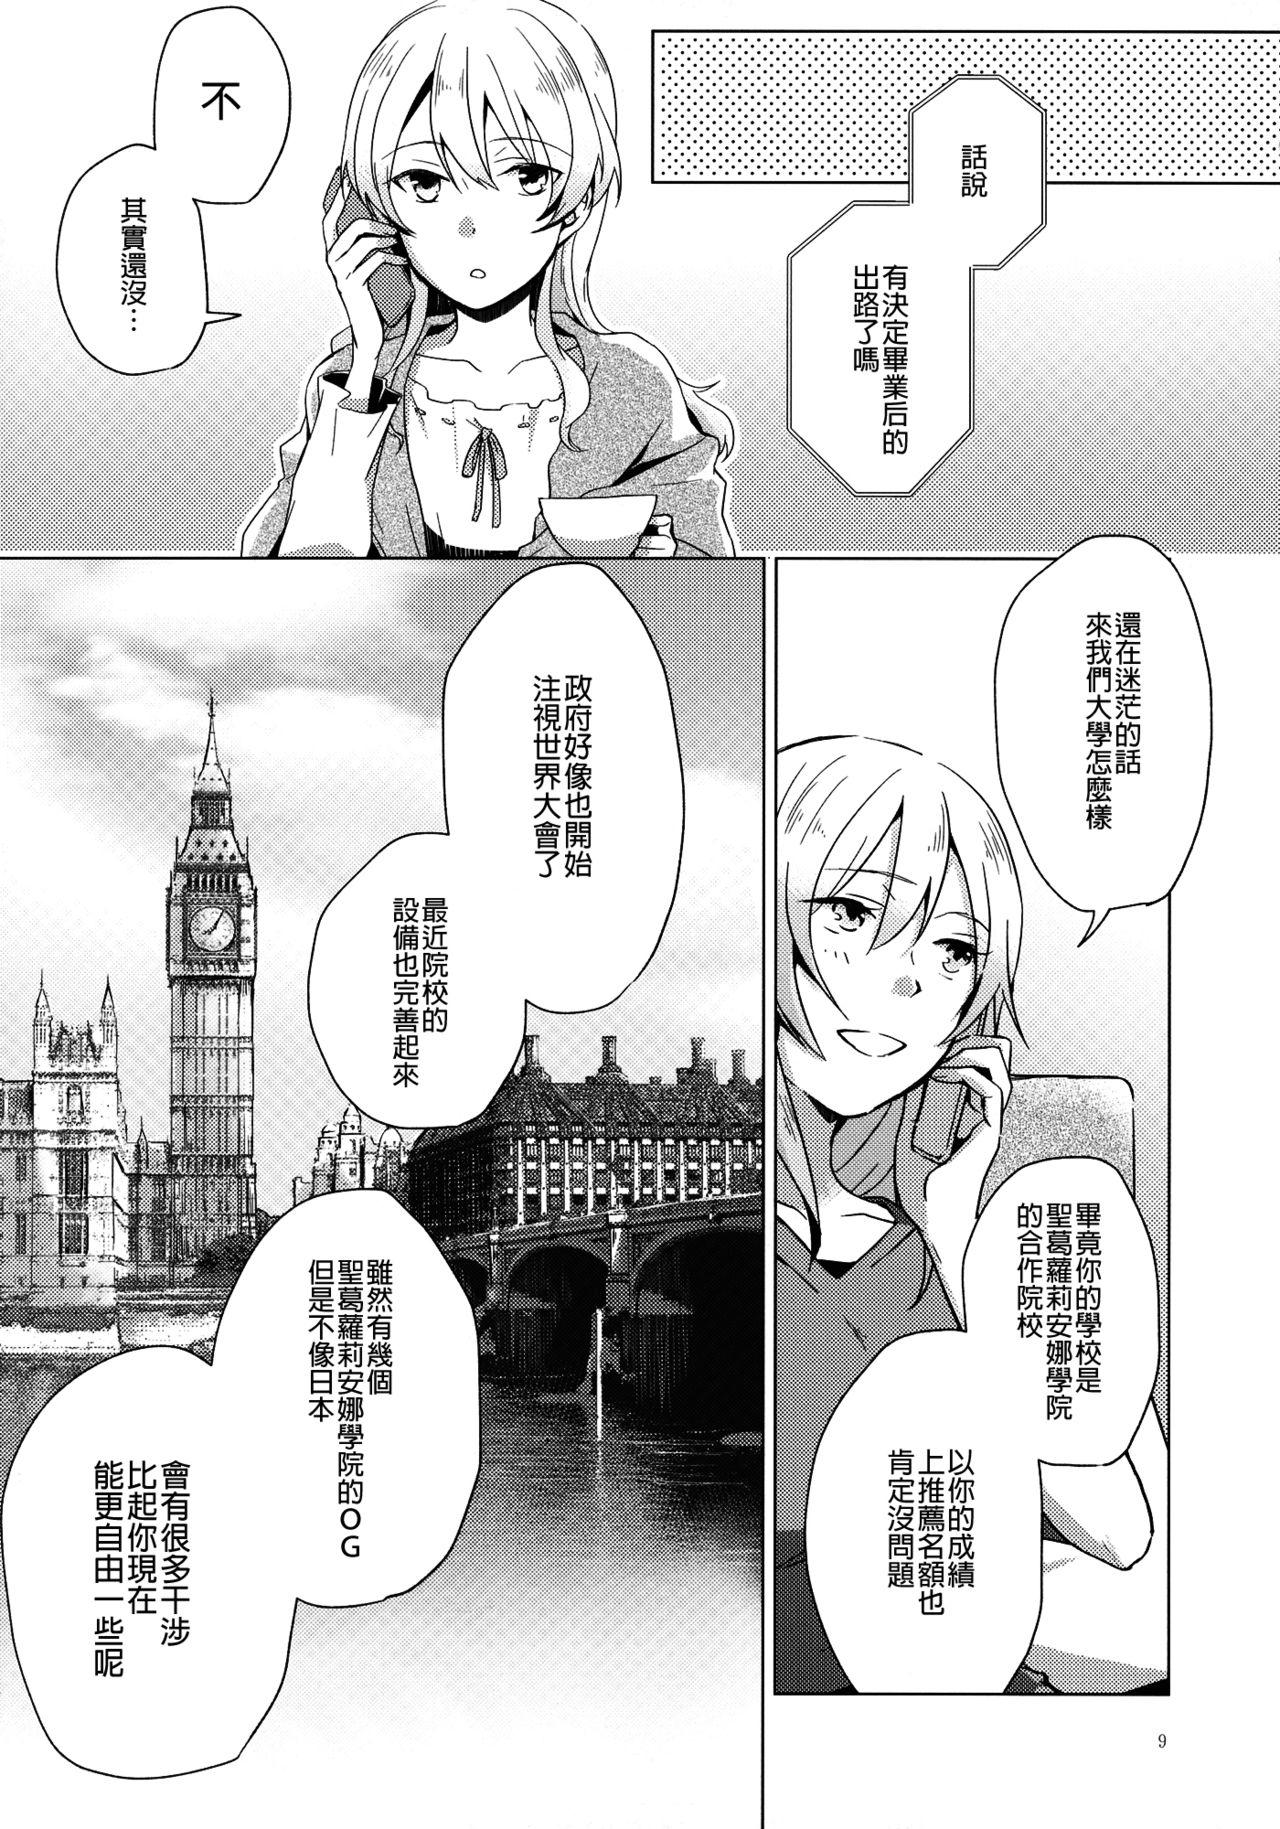 Good Over Time | 超時 - Girls und panzer Amature Sex - Page 9